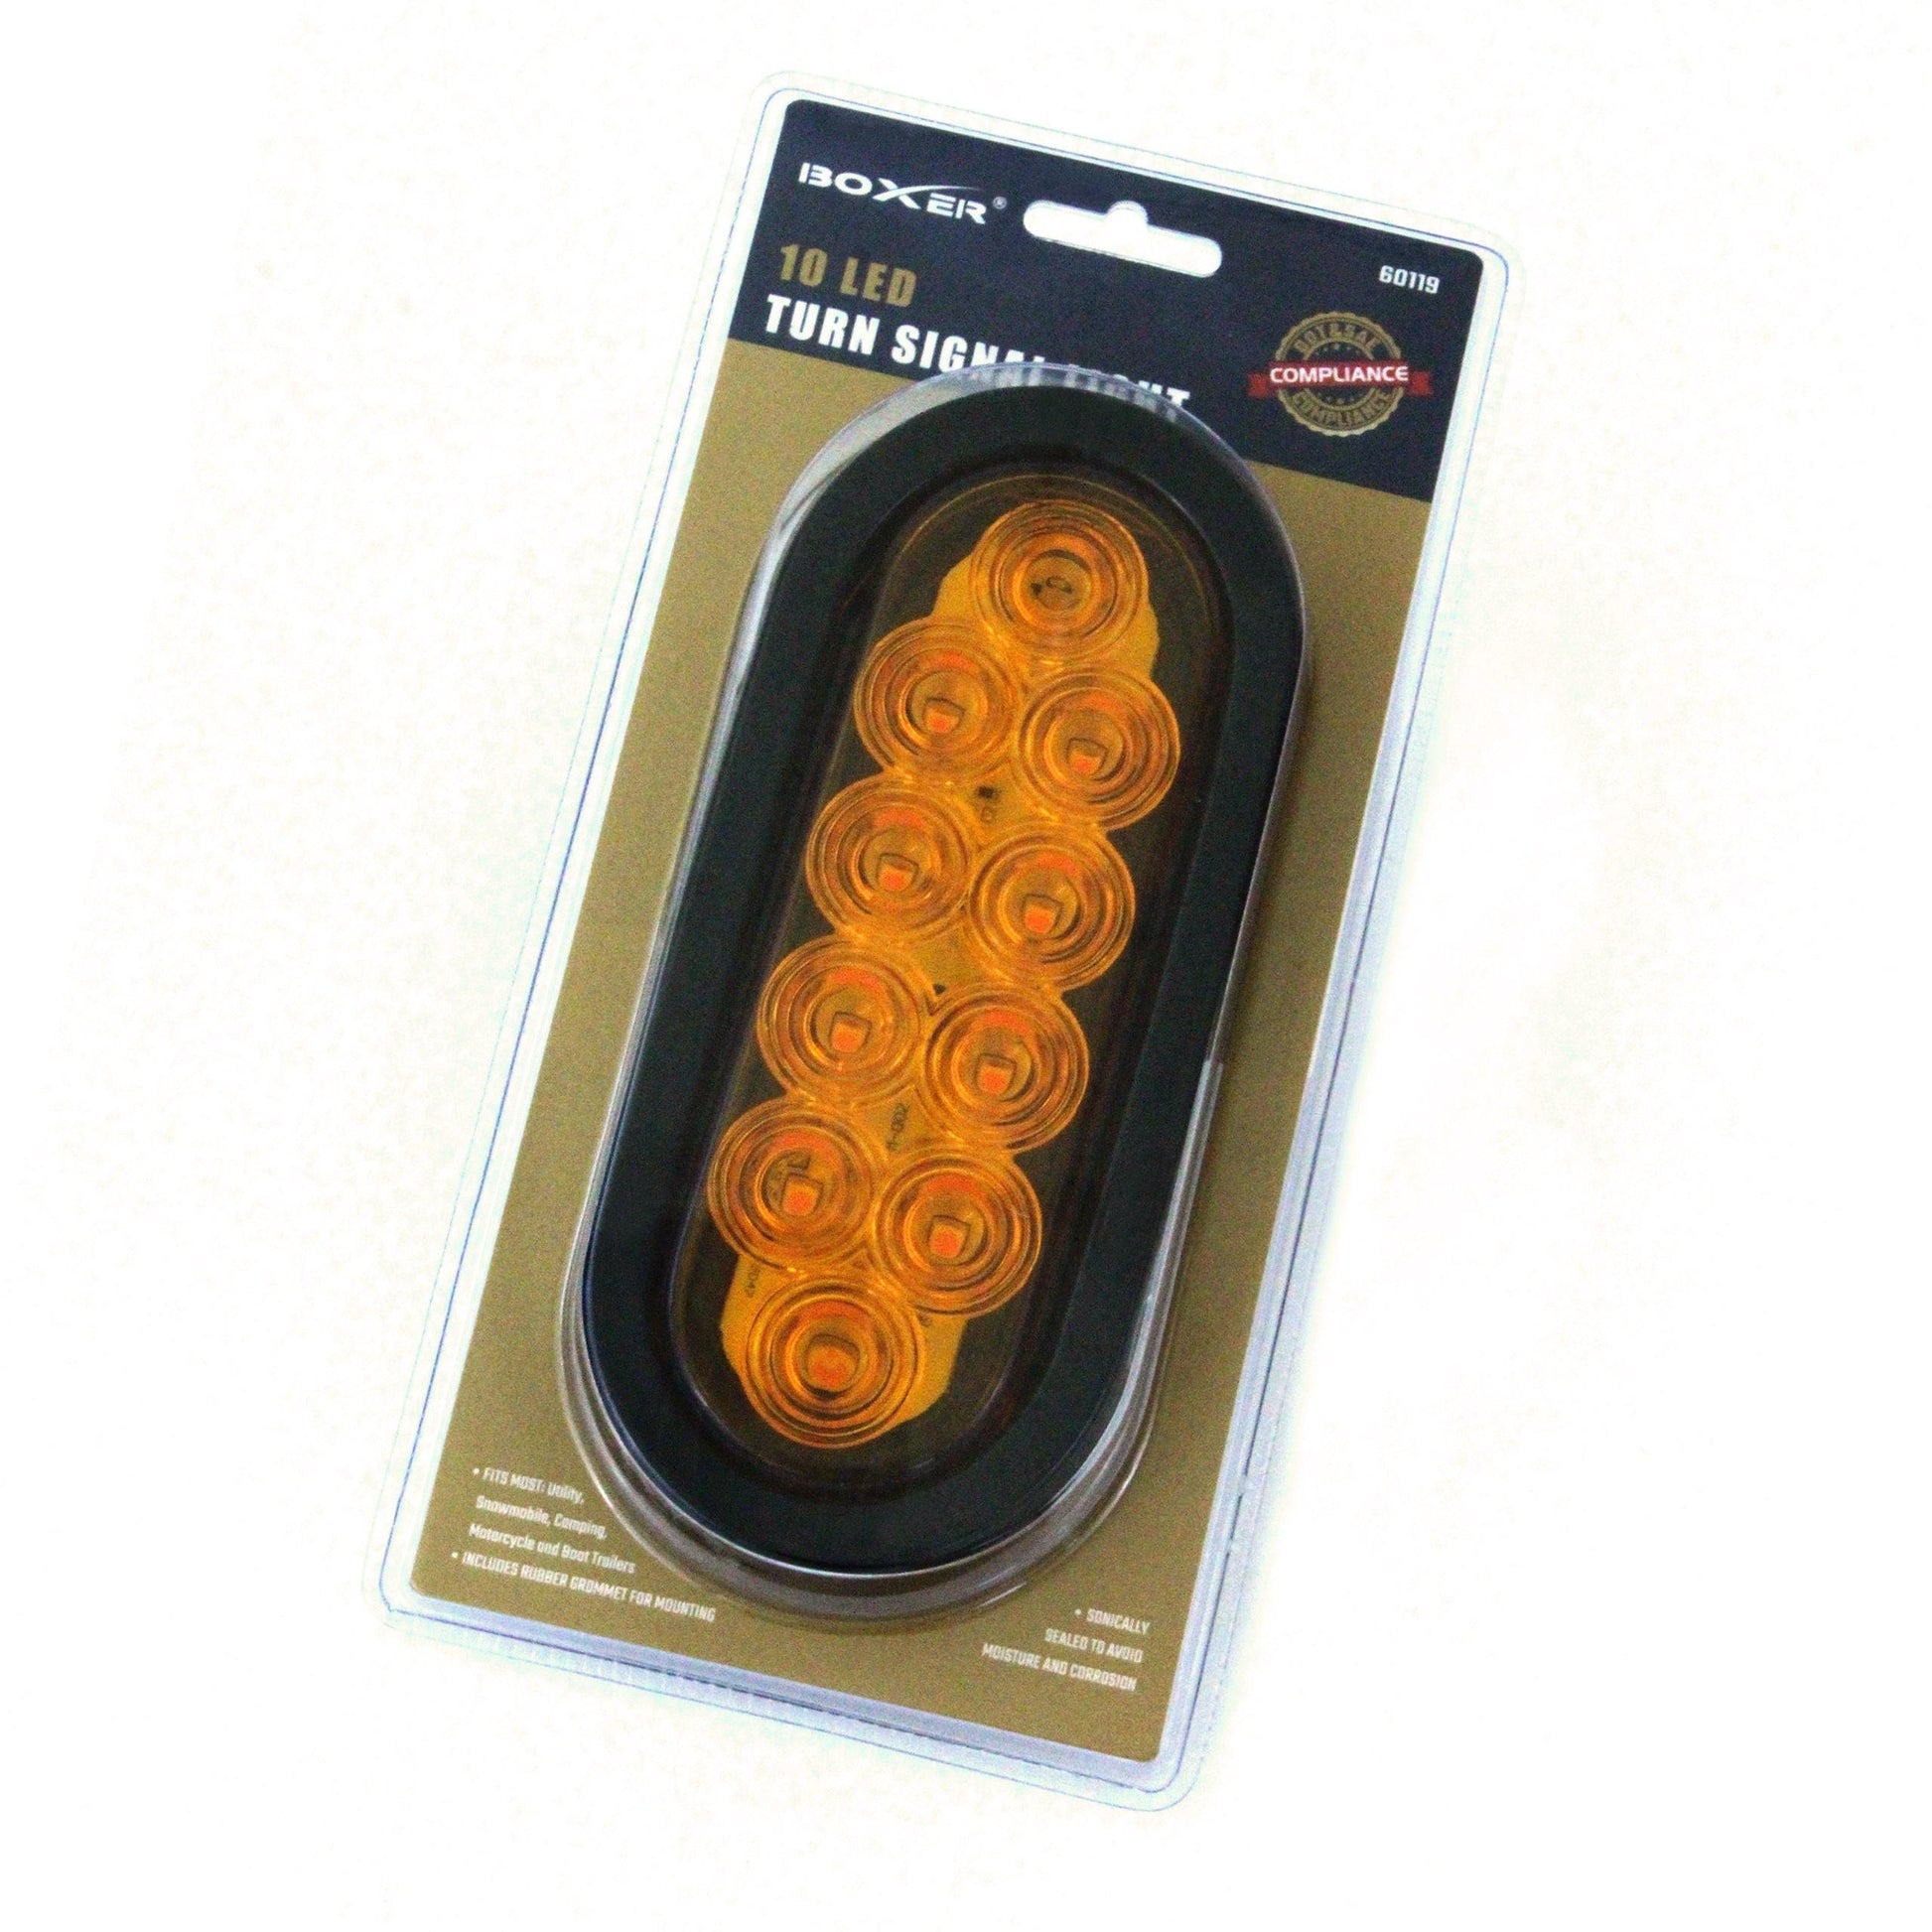 10 LED Trailer Turn Signal Light in Amber - Boxer Tools